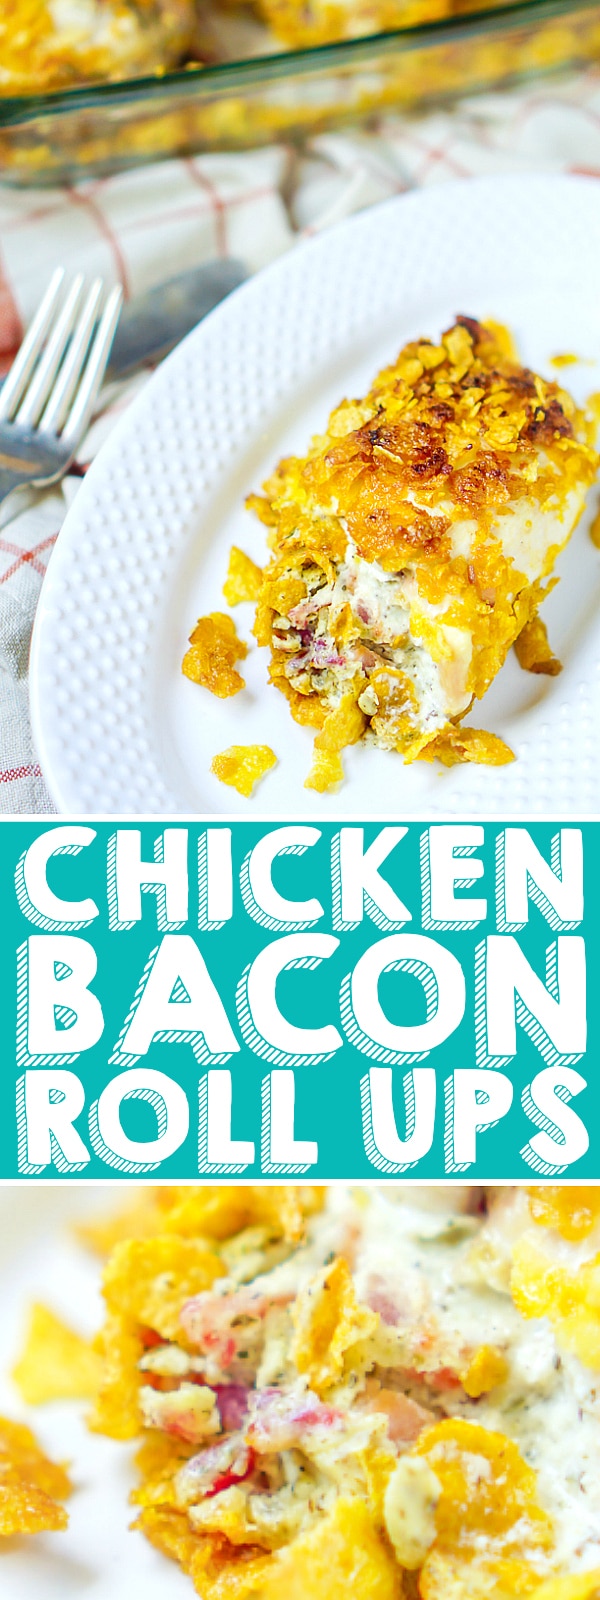 Chicken Bacon Roll Ups with Herbed Cream Cheese Filling - This stuffed chicken roll recipe is an easy dinner idea made better with yummy bacon! Comes with instructions for freezer meal prep! | The Love Nerds #chickenrolluprecipe #stuffedchicken #chickenbreastfreezermeal